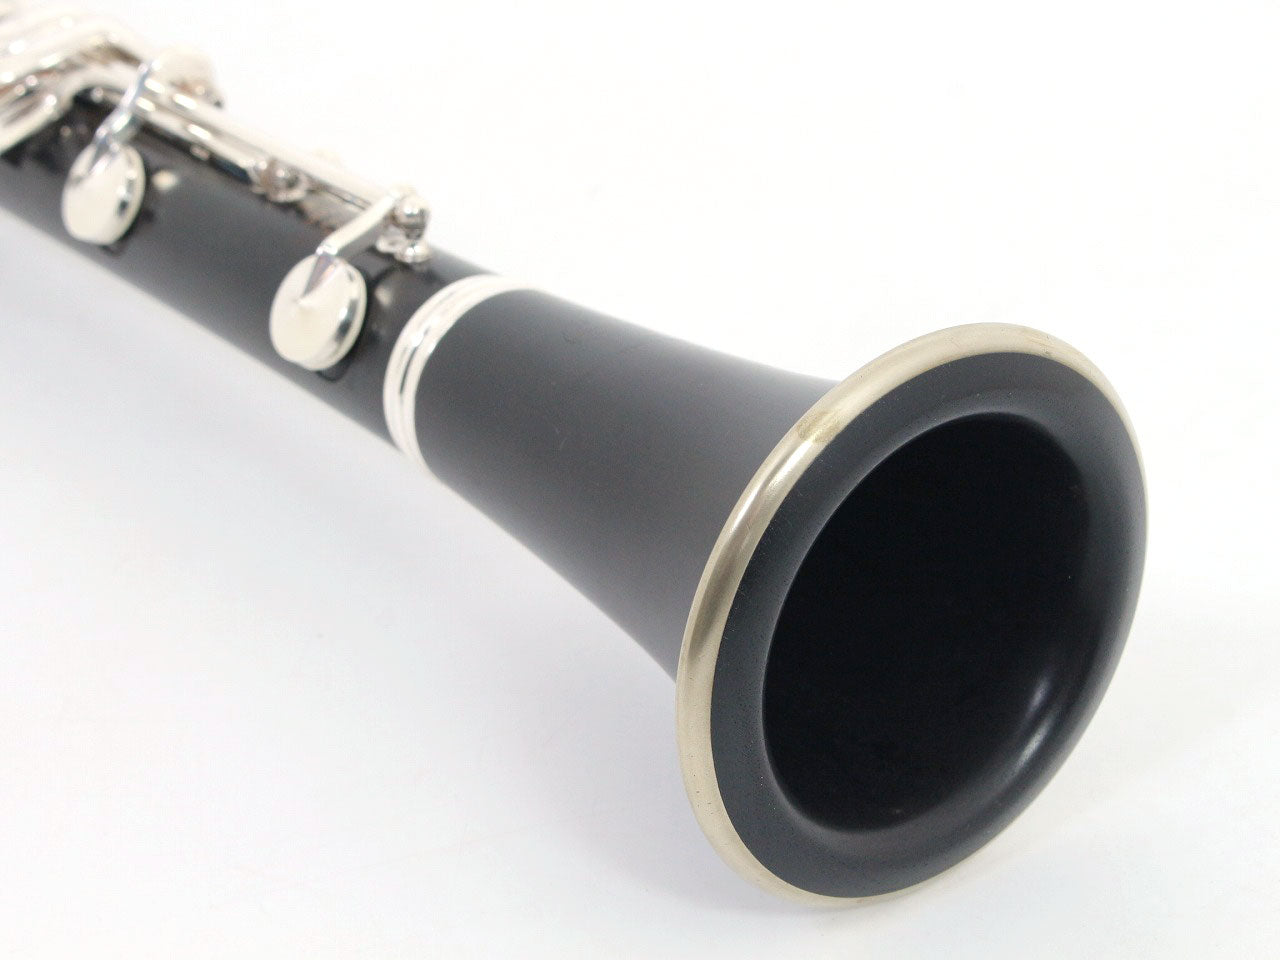 [SN 476469] USED Buffet Crampon / B flat clarinet R13SP, all tampos replaced [09]